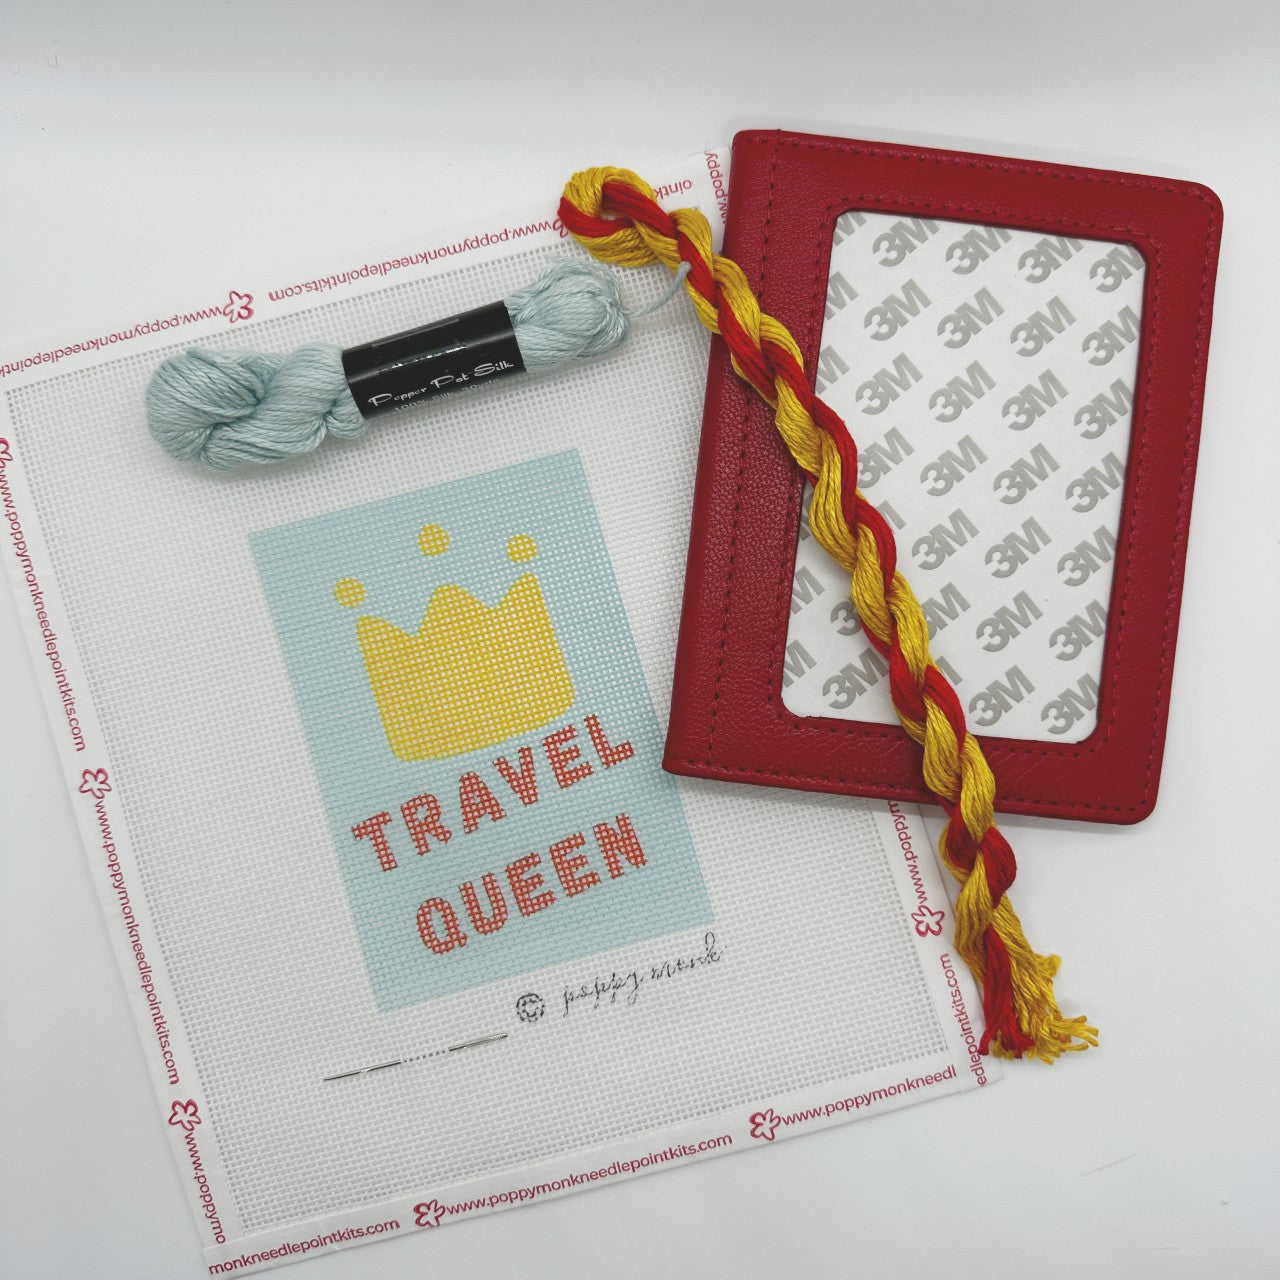 Needlepoint passport wallet kit with Travel Queen canvas